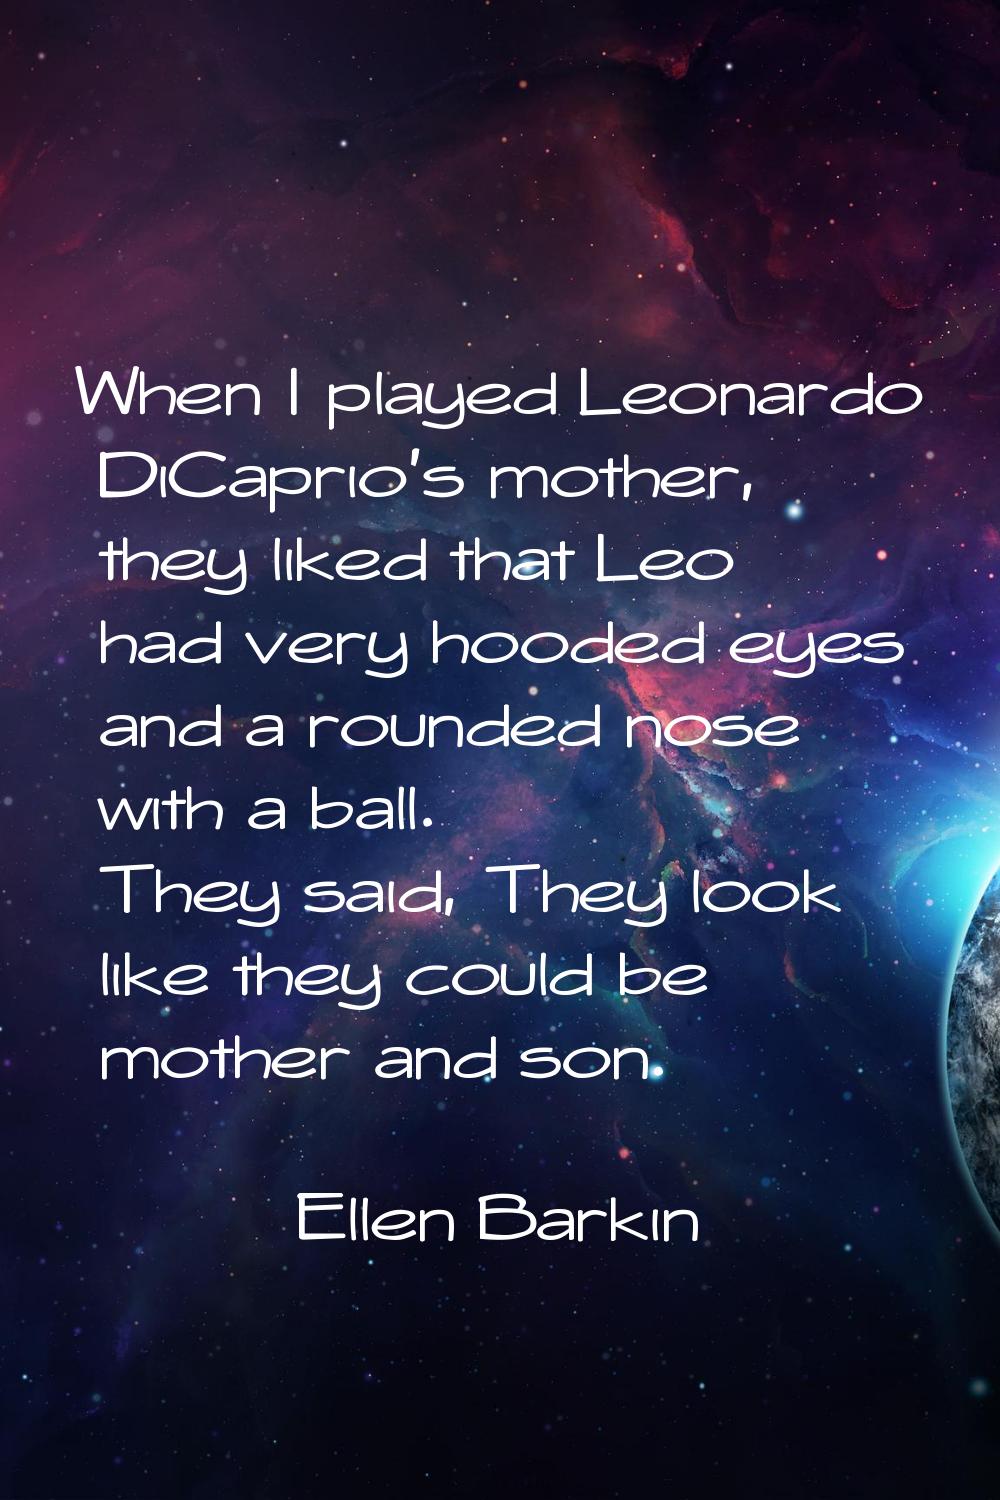 When I played Leonardo DiCaprio's mother, they liked that Leo had very hooded eyes and a rounded no